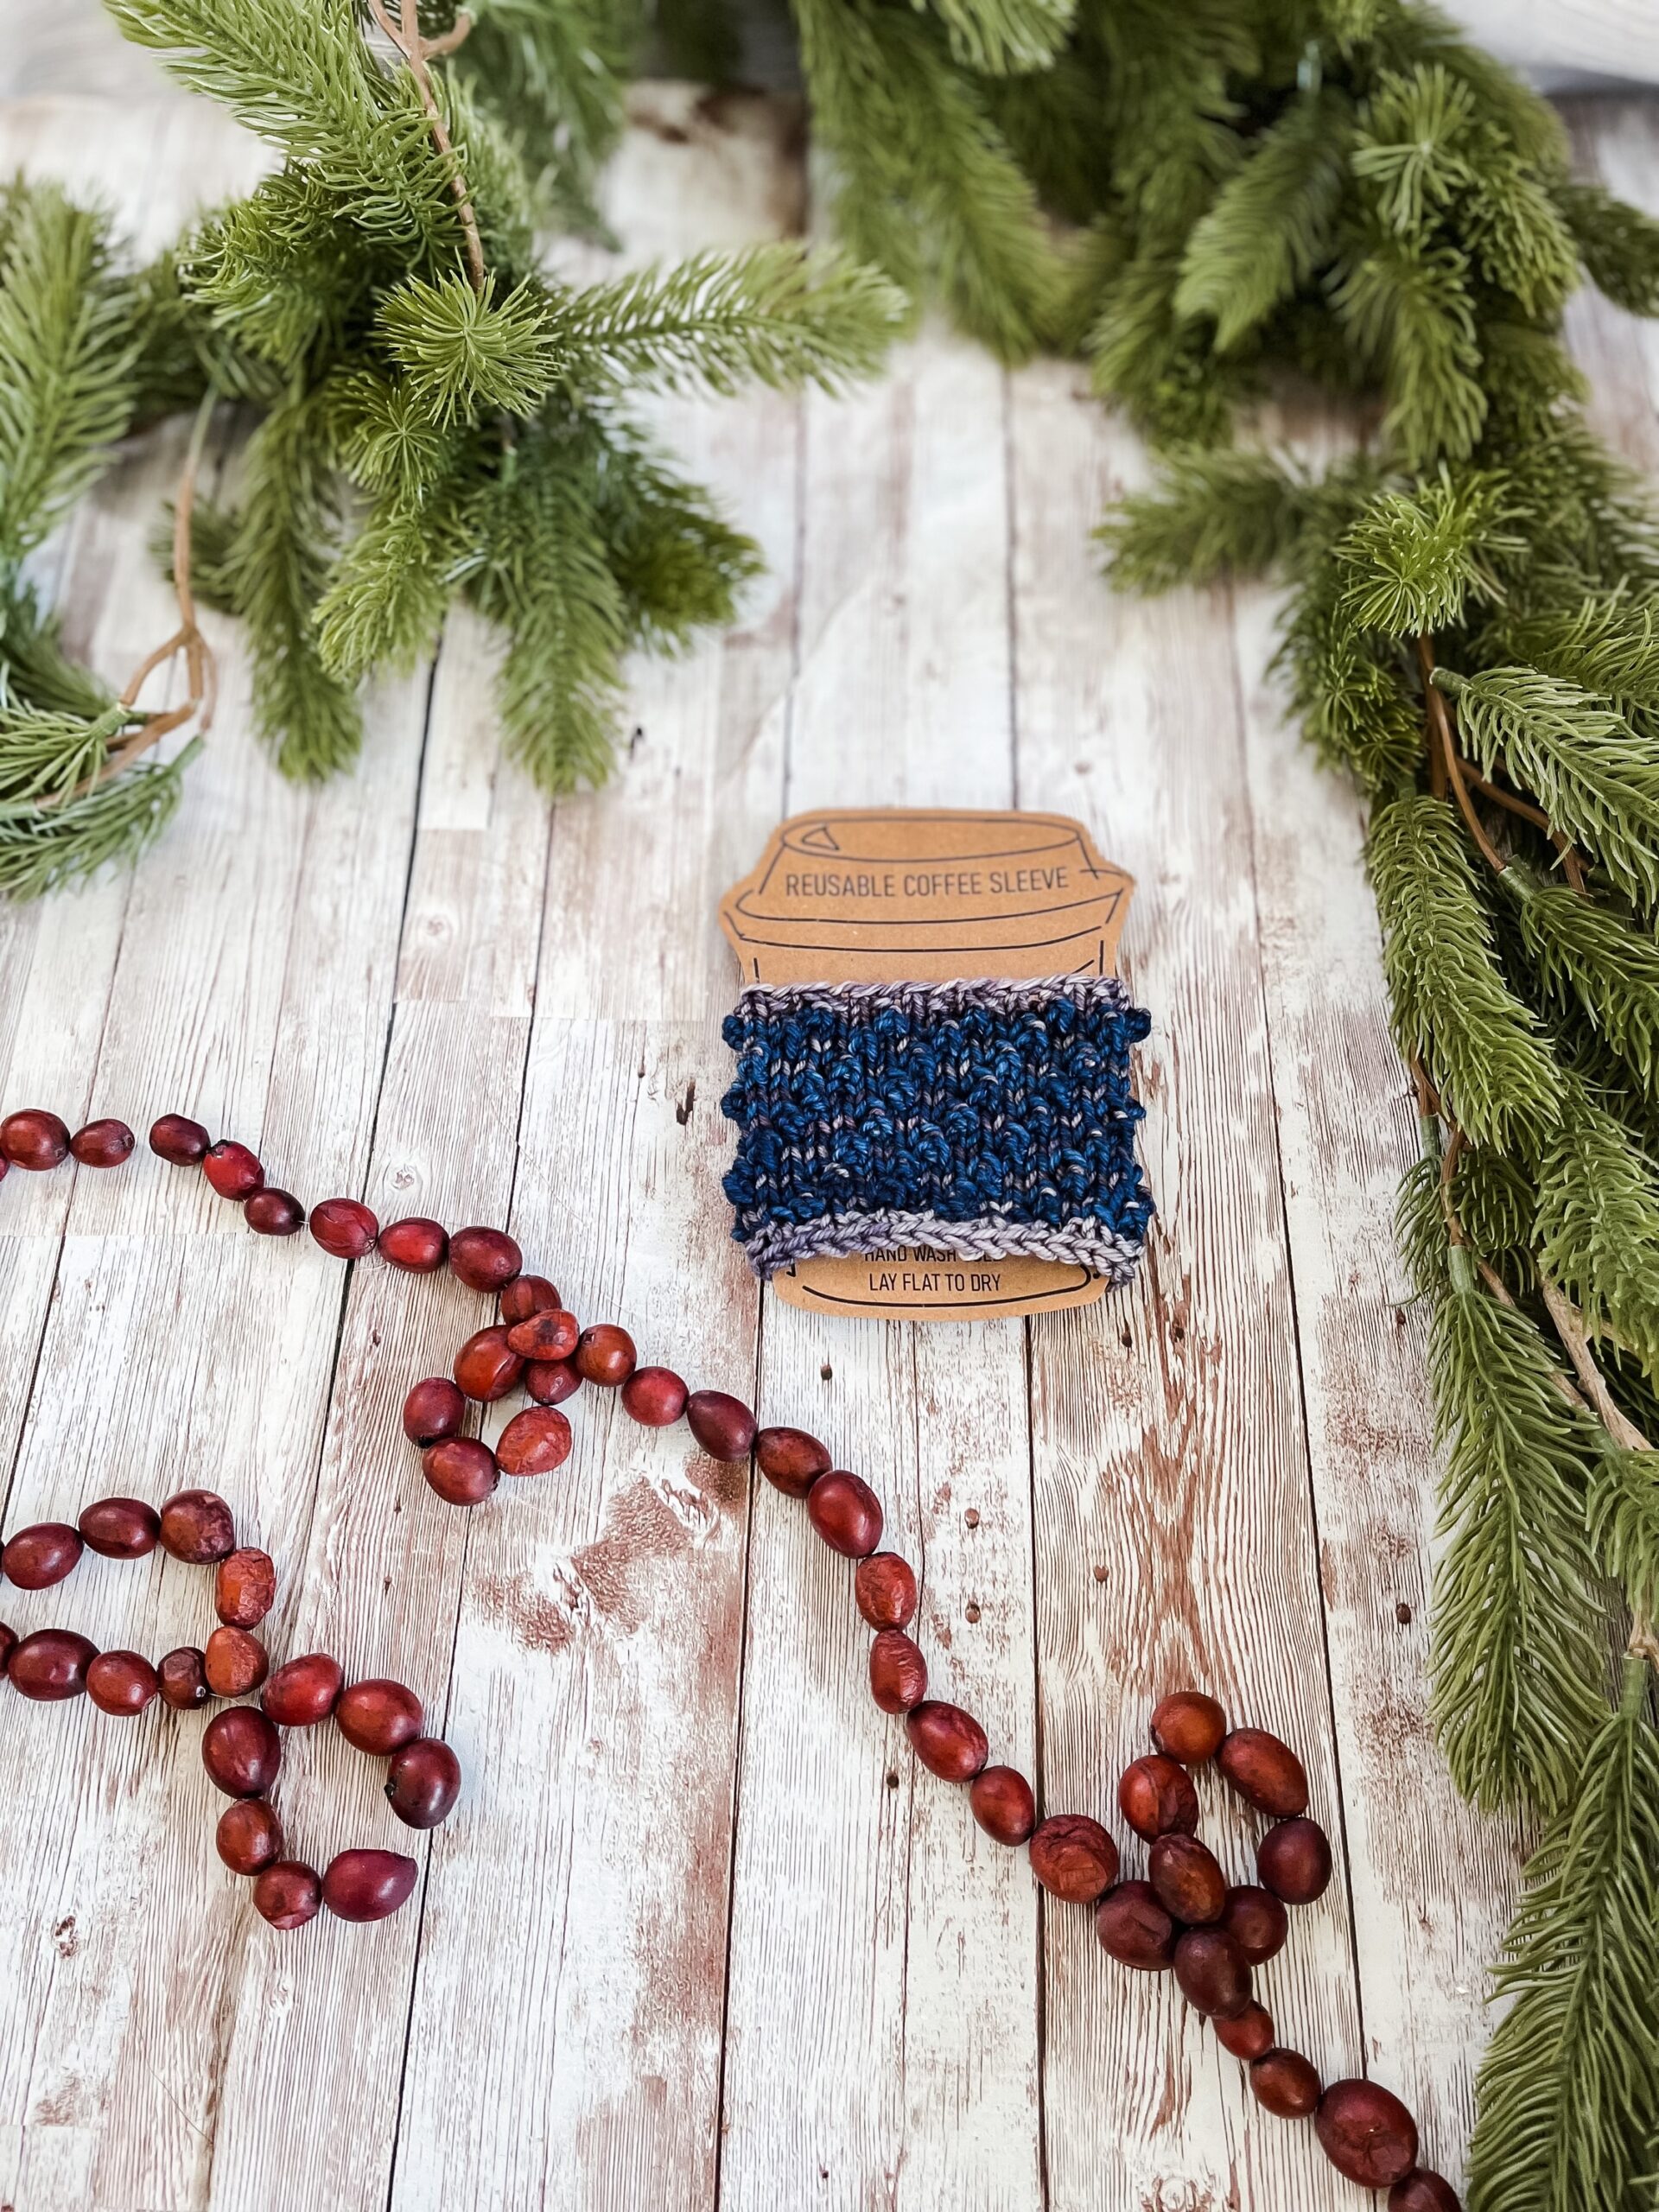 A blue and gray coffee sleeve is wrapped around a kraft paper image of a coffee cup. It rests on a wood plank, surrounded by pine branches and a cranberry garland.